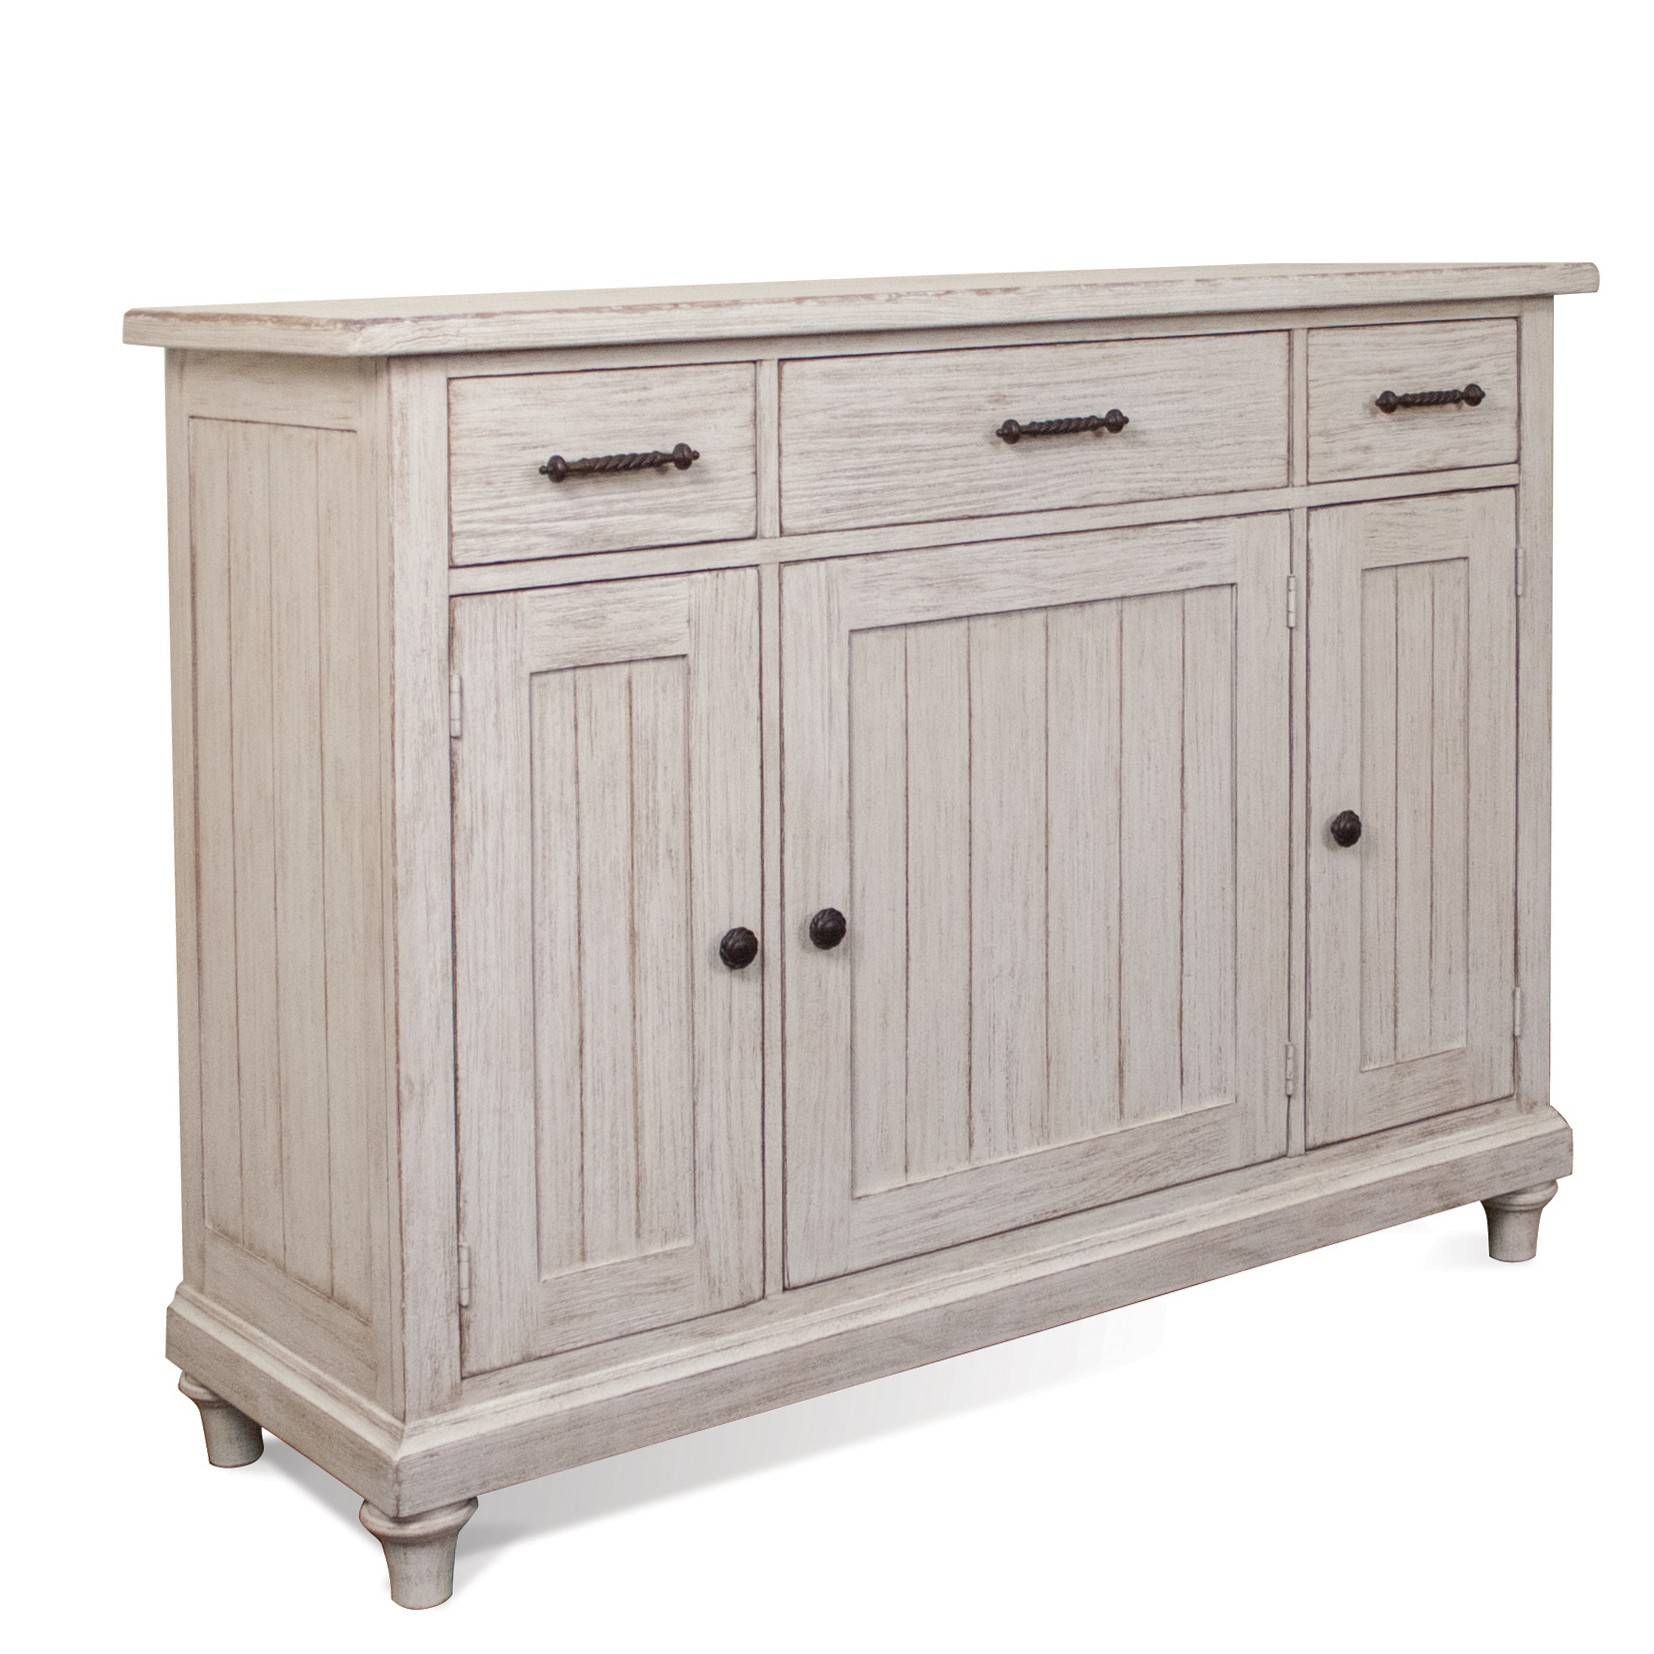 Aberdeen Wood Sideboard Server In Weathered Worn White Intended For White And Wood Sideboard (View 5 of 20)